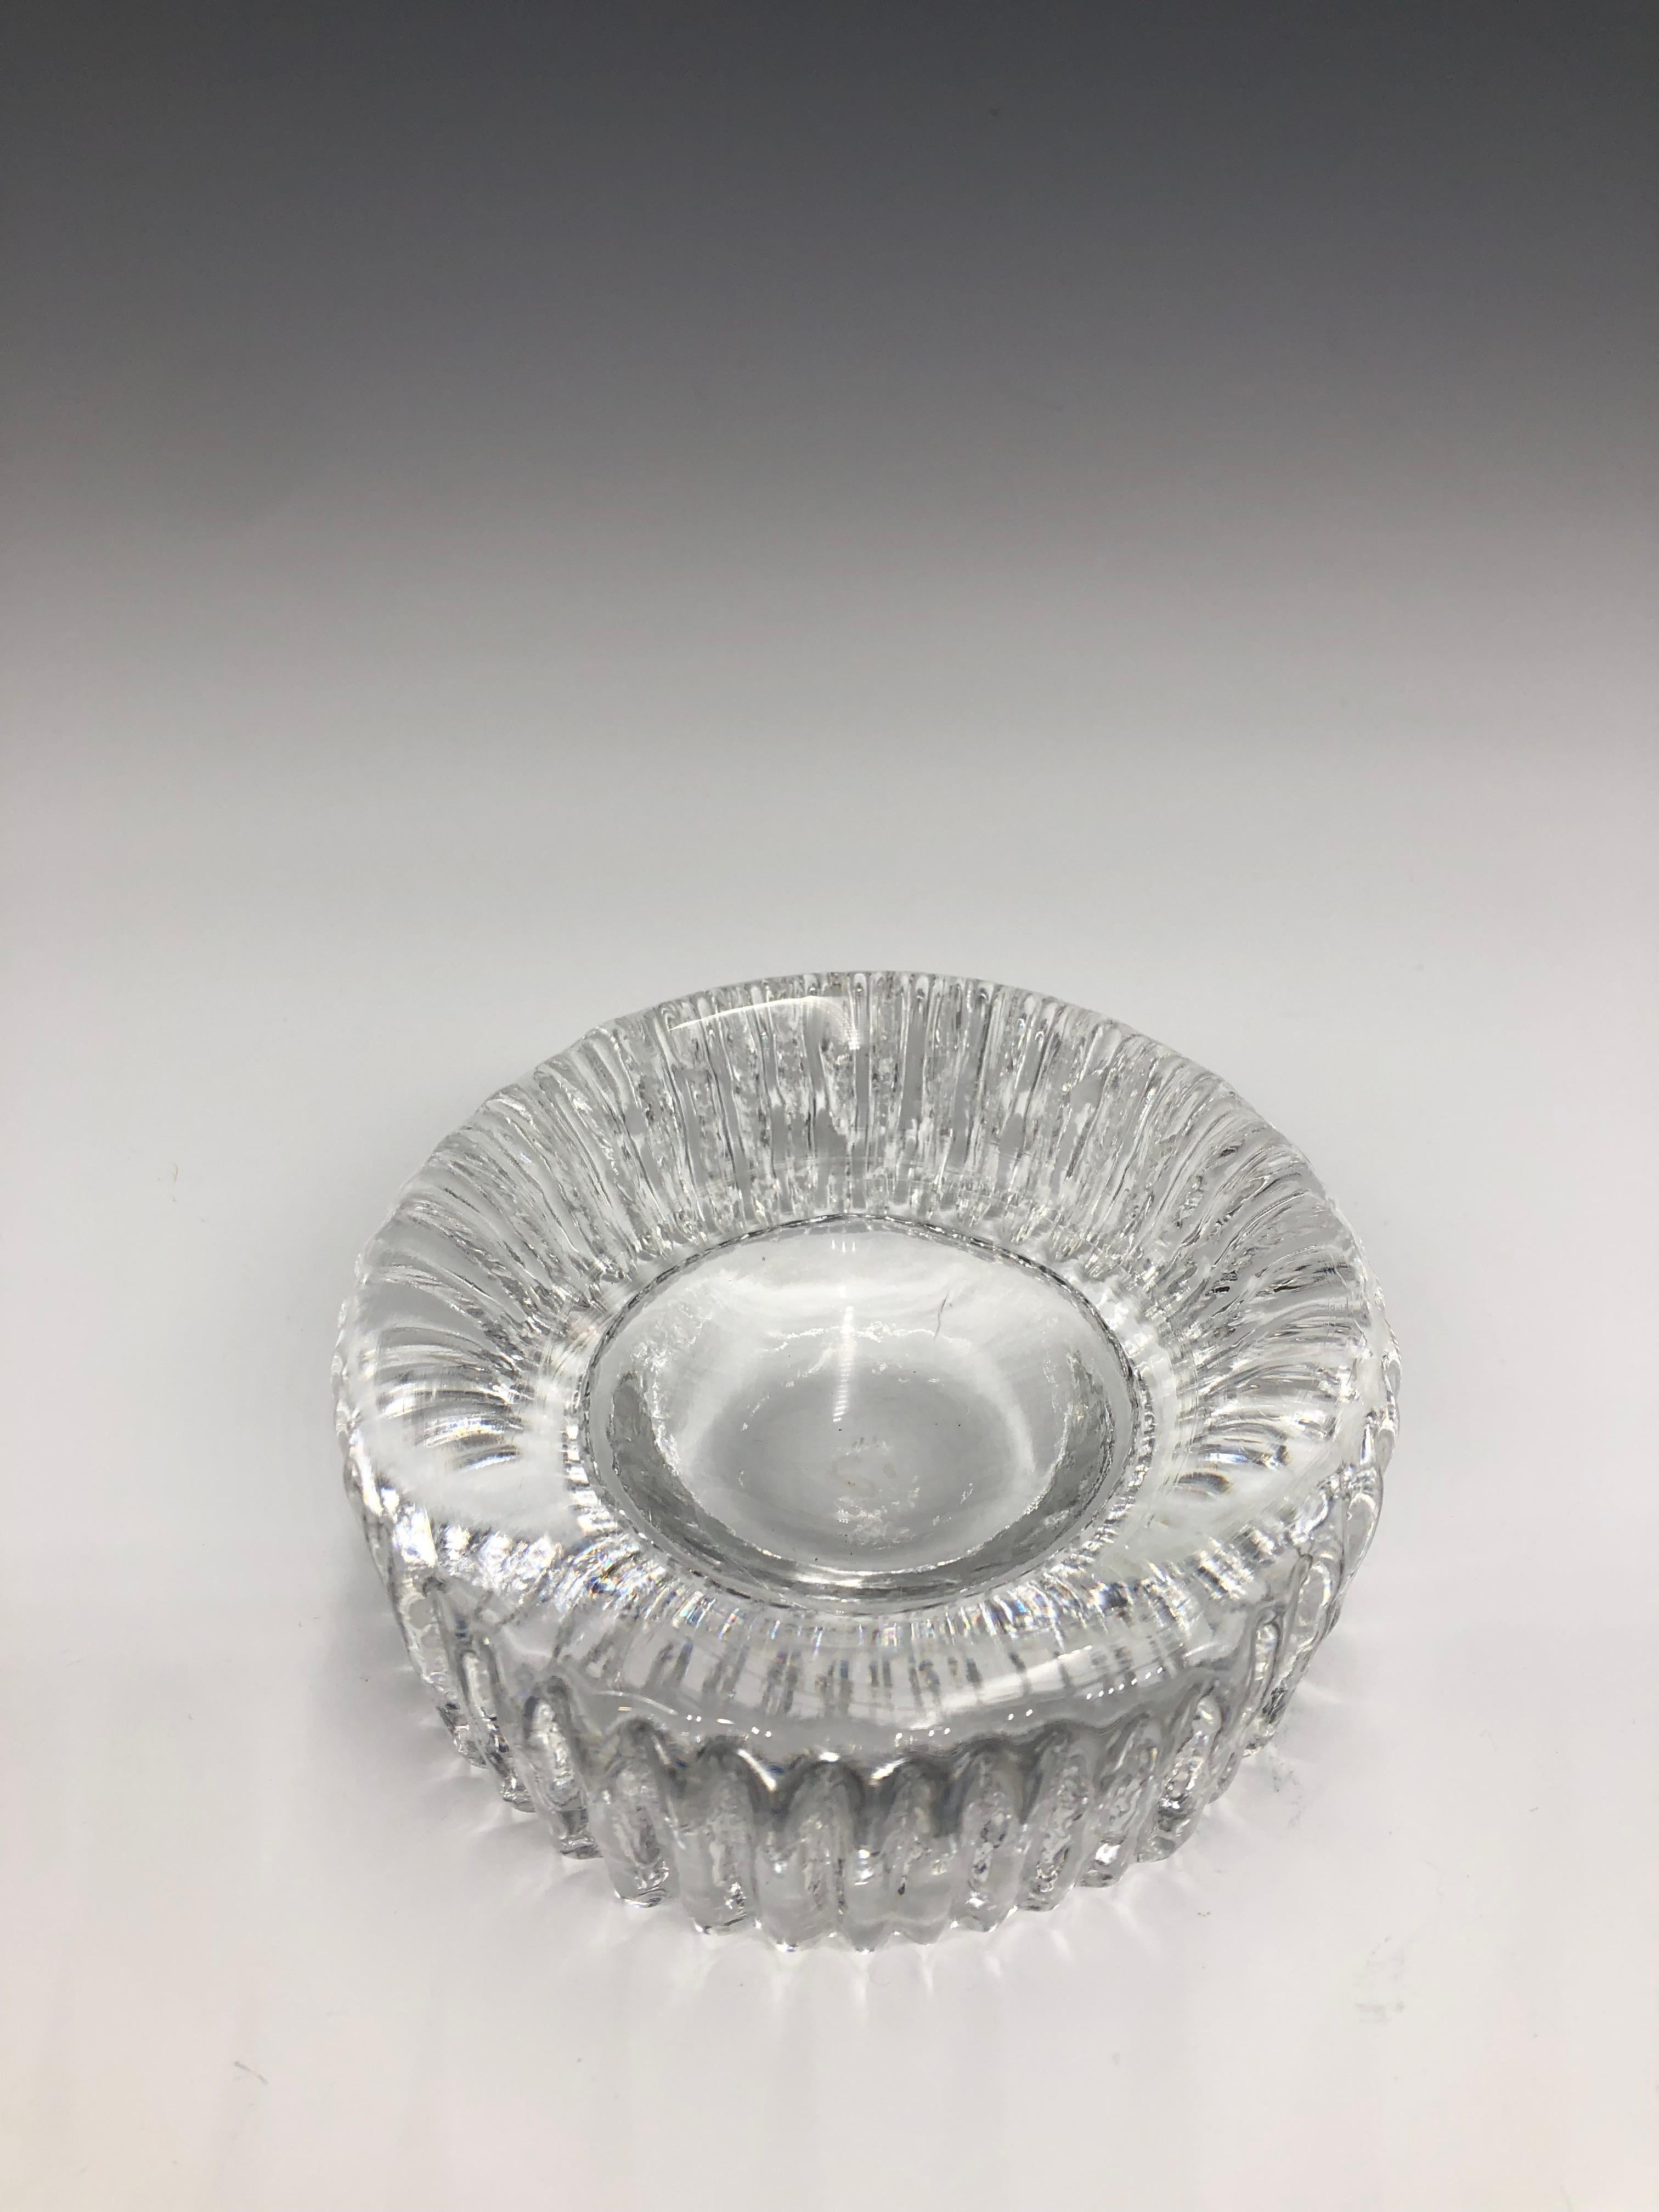 Stunning Mid-Century Modern Scandinavian 1950s Kosta Boda Rurik clear round textured ashtray in great vintage condition. No chips or cracks. 

Glass has a nice weight to it —minimal wear commensurate with age and use. It can be used as an ashtray, a